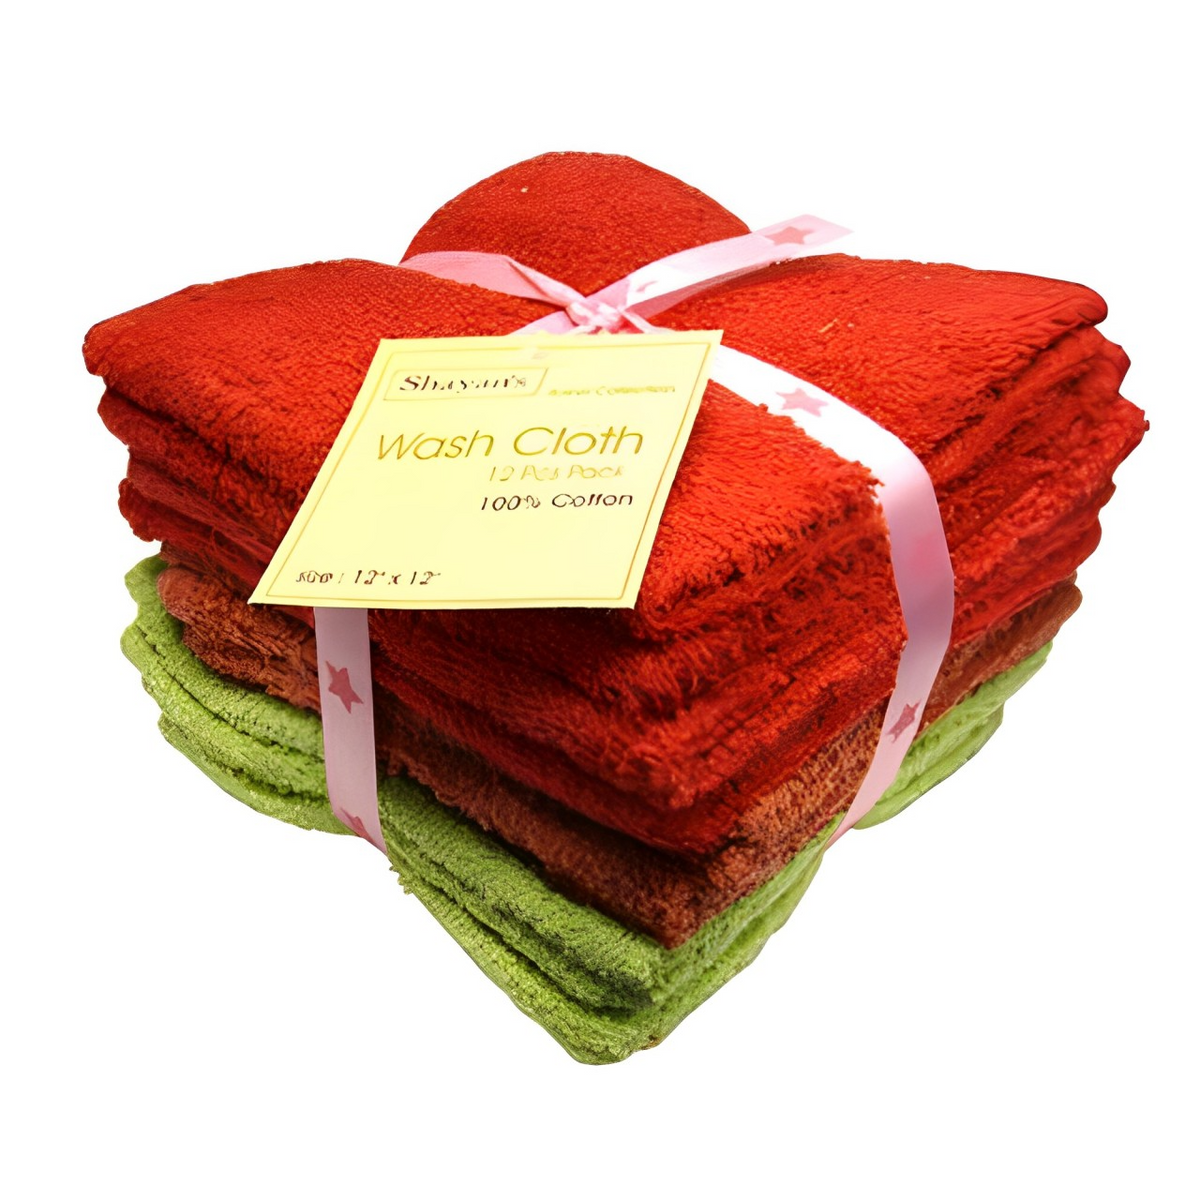 KITCHEN DRY TOWELS 5pc